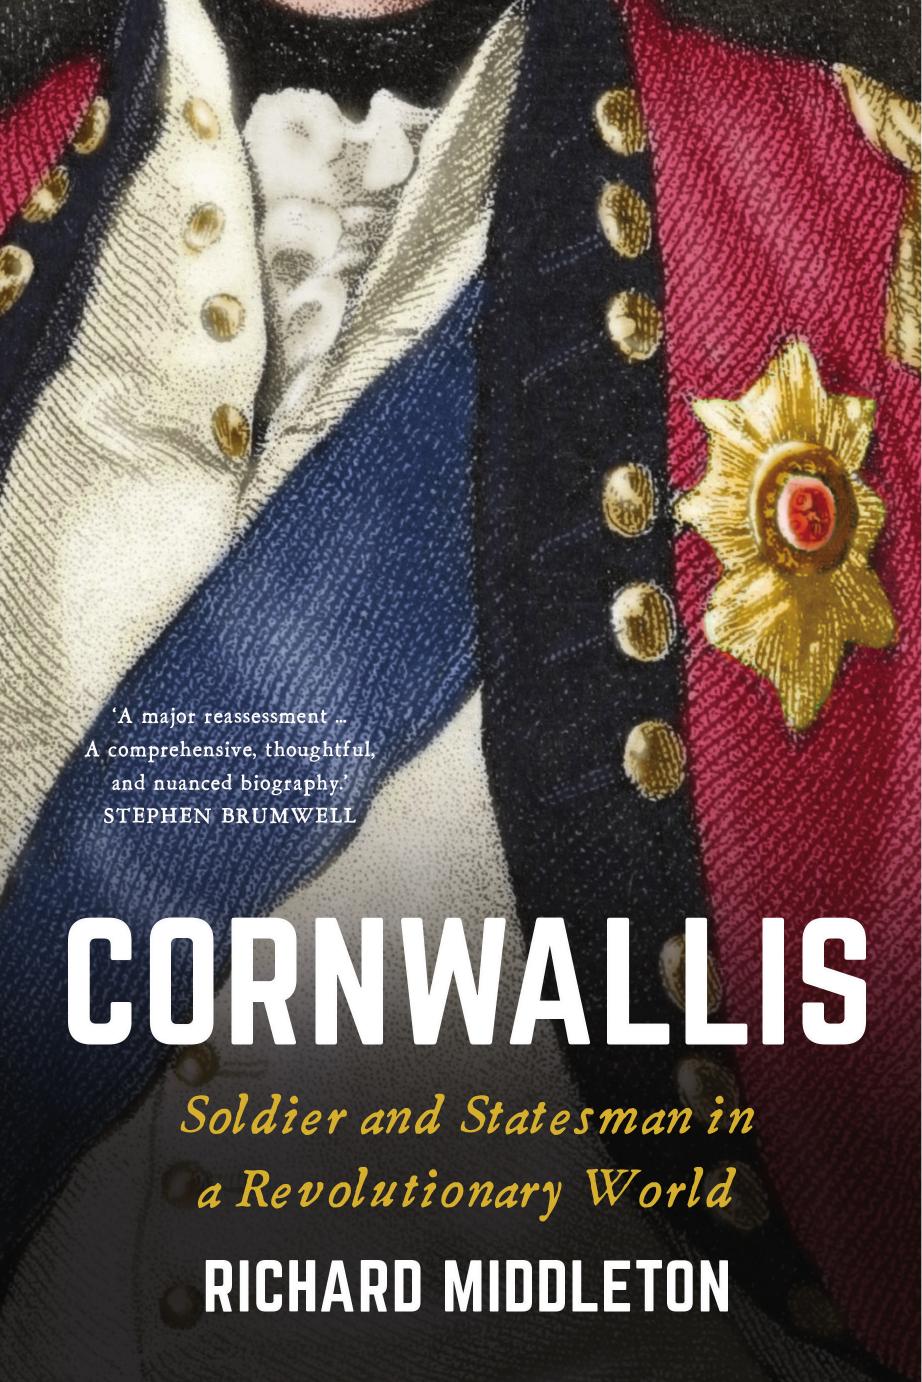 Cornwallis: Soldier and Statesman in a Revolutionary World by Richard Middleton